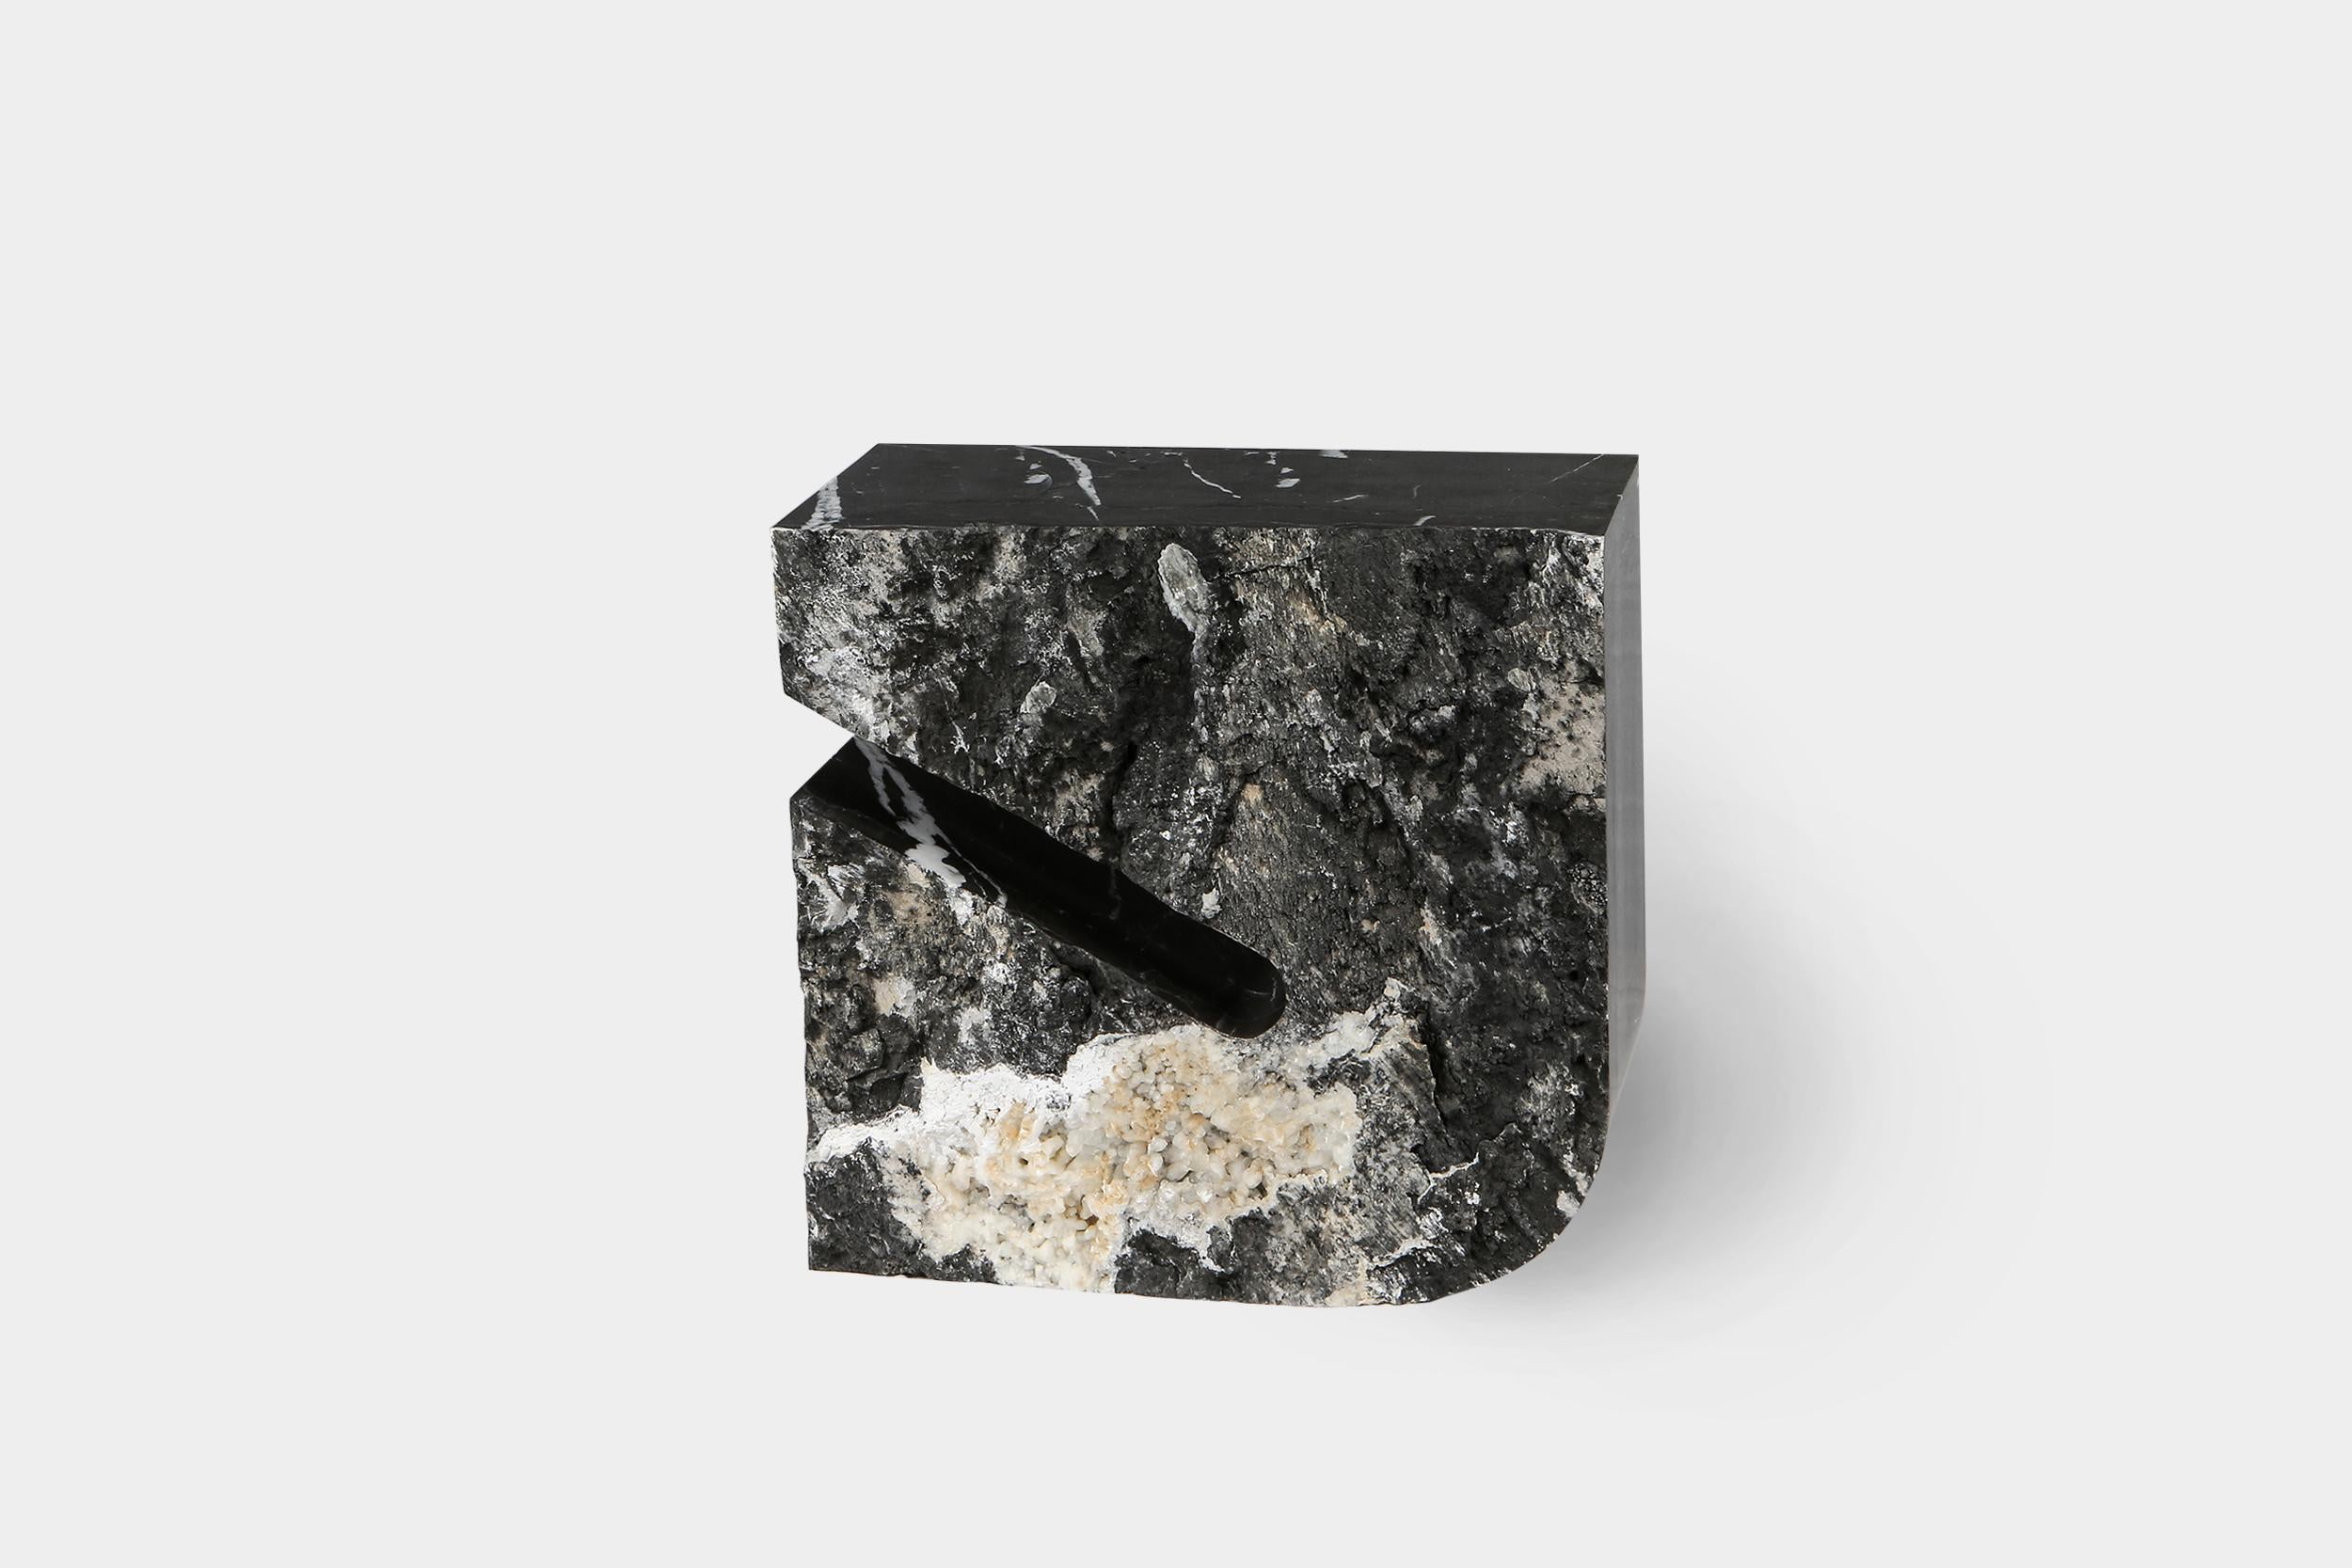 Found II side table No.2 by A Space
Dimensions: D 48 x W 25 x H 48cm
Materials: Marble

Spontaneity, environmental awareness and the primeval nature of the materials are central themes explored in this collection, which focuses on the power of